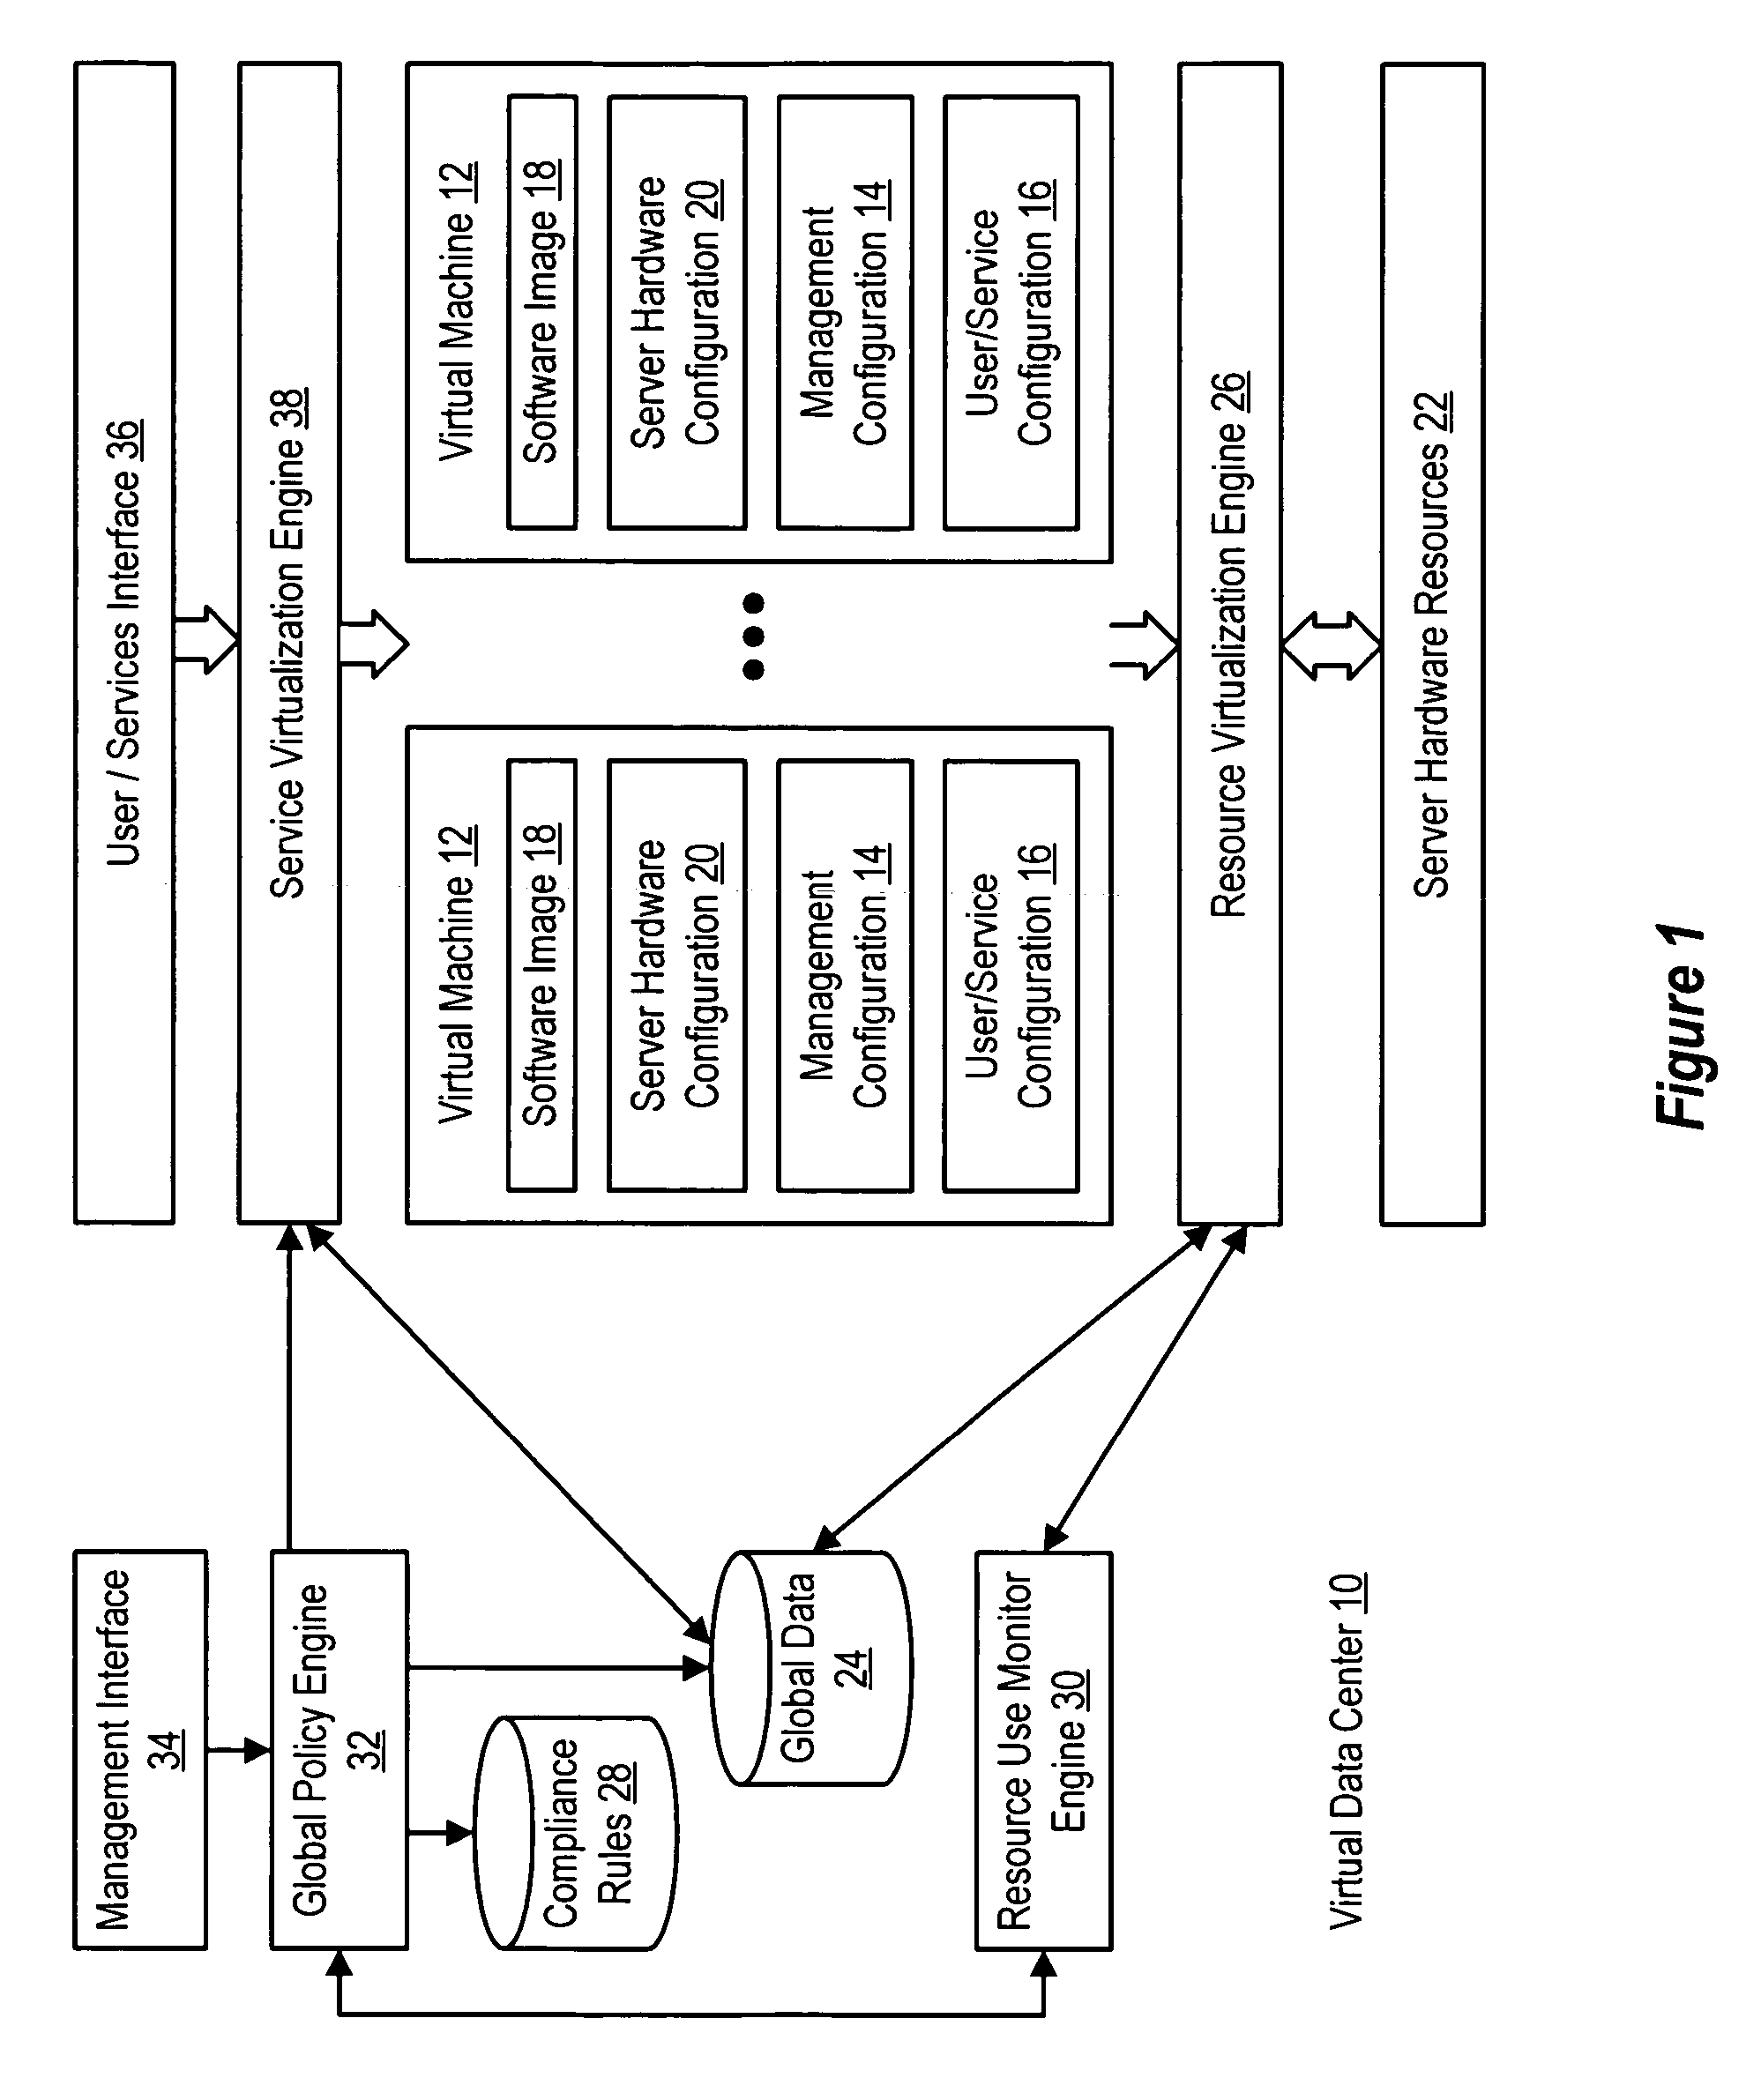 System and method using virtual machines for decoupling software from management and control systems